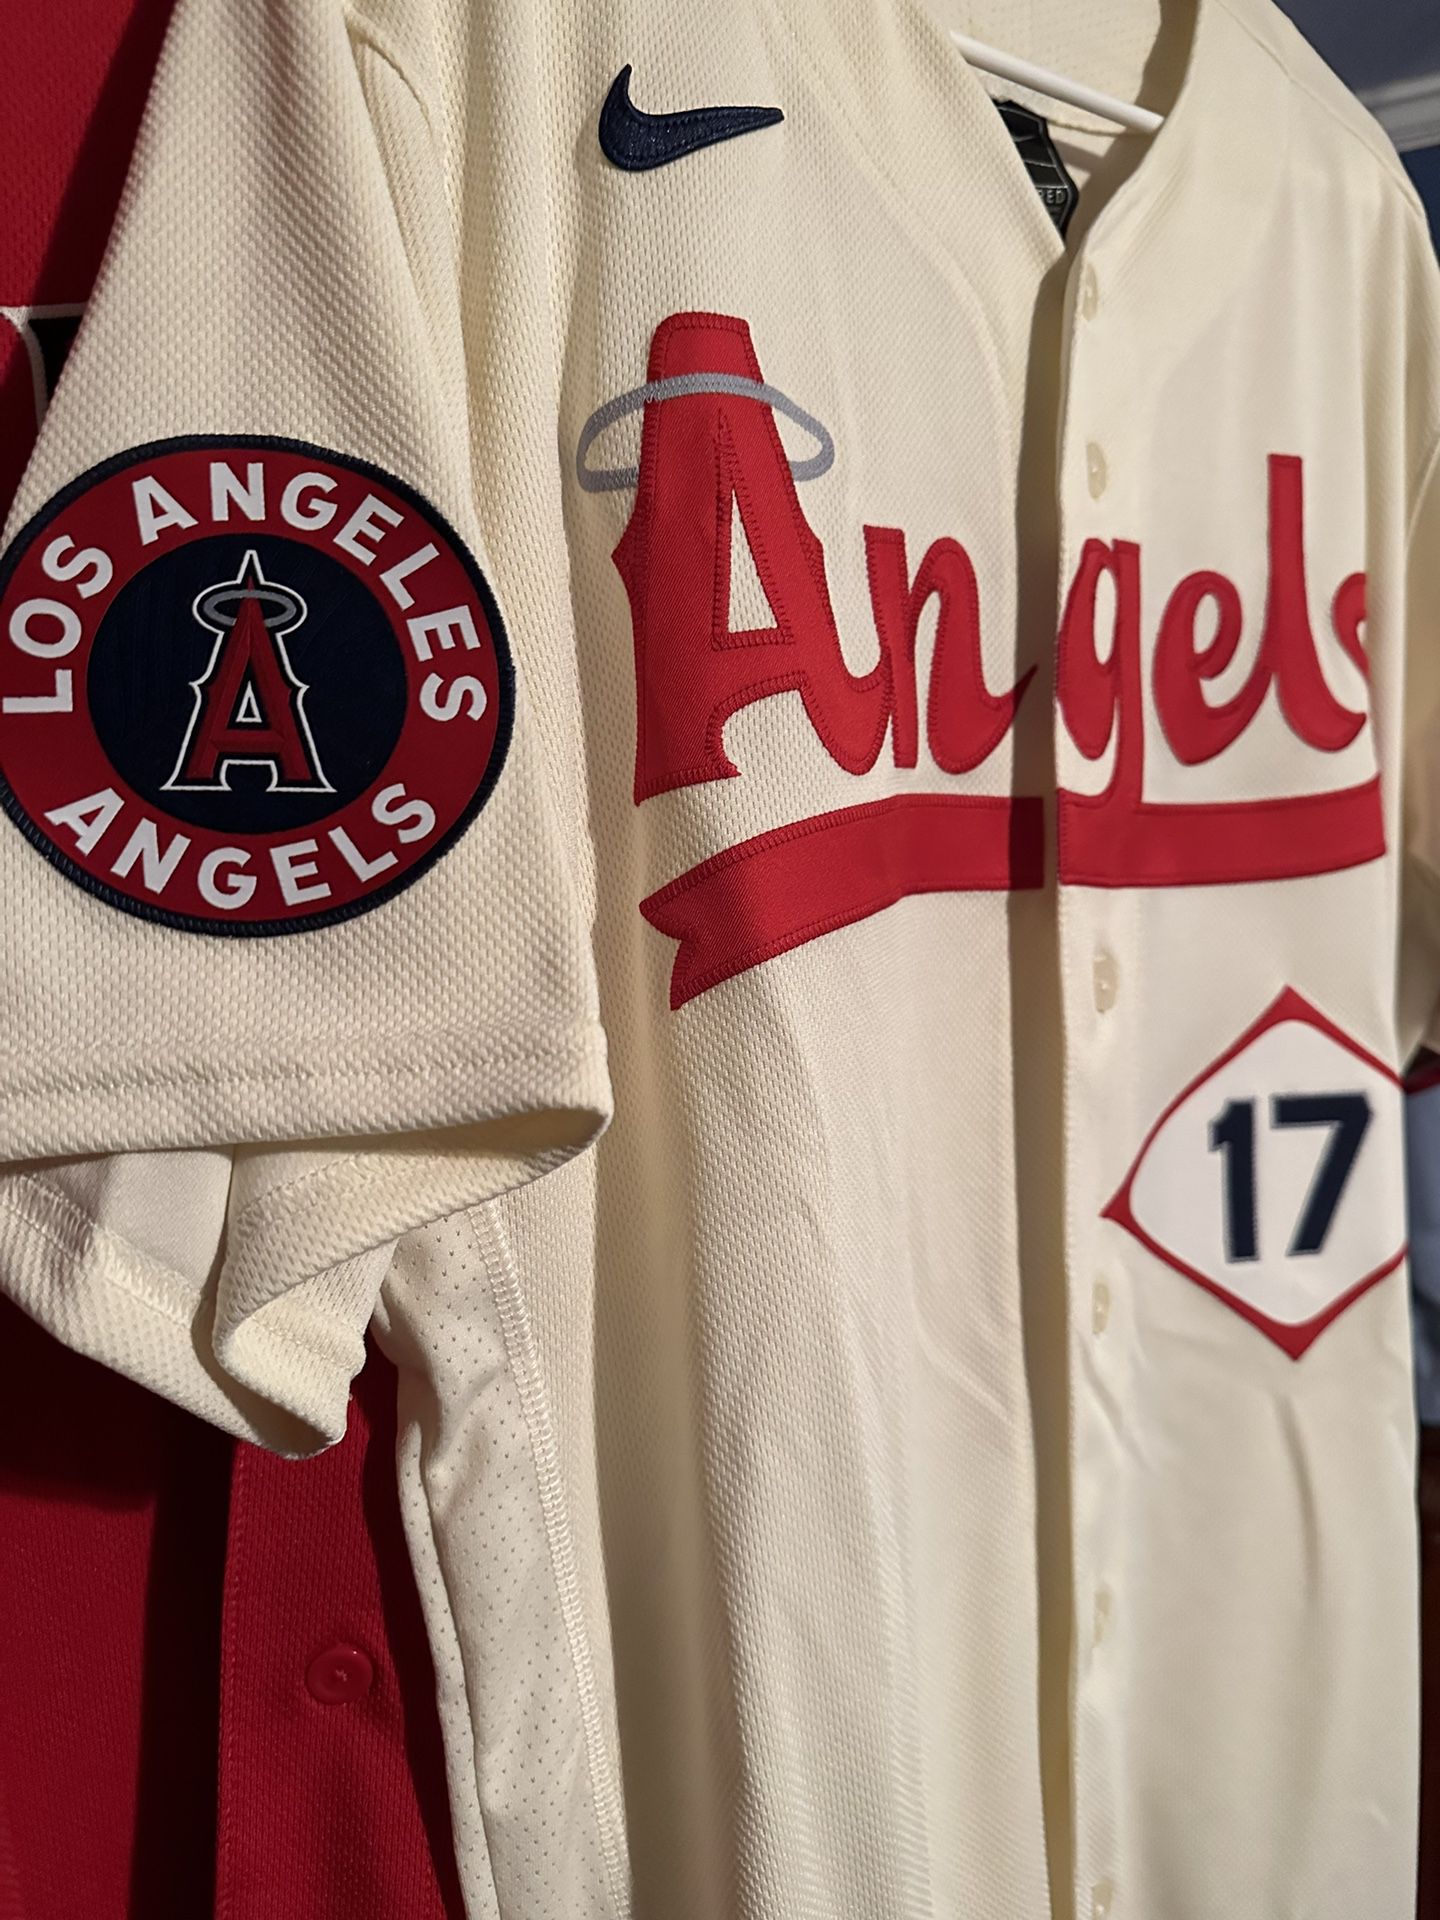 SHOHEI Ohtani Jersey Mens XL for Sale in Upland, CA - OfferUp